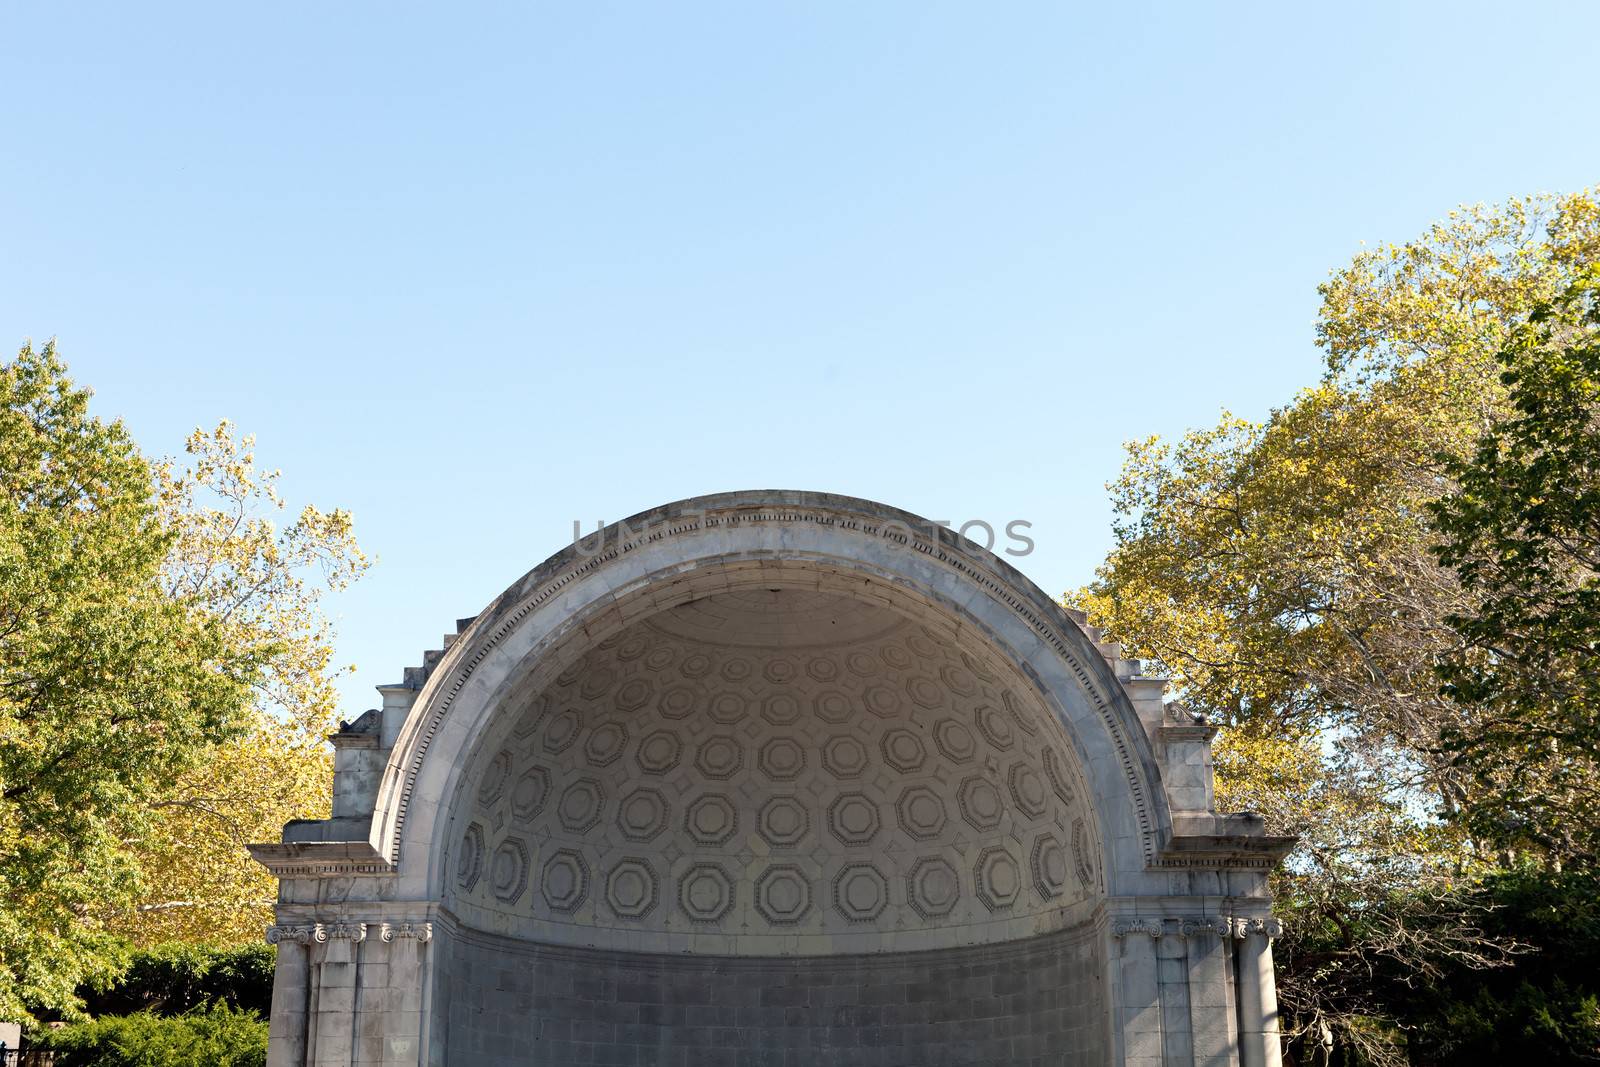 Public music shell stage located in Central Park NYC.